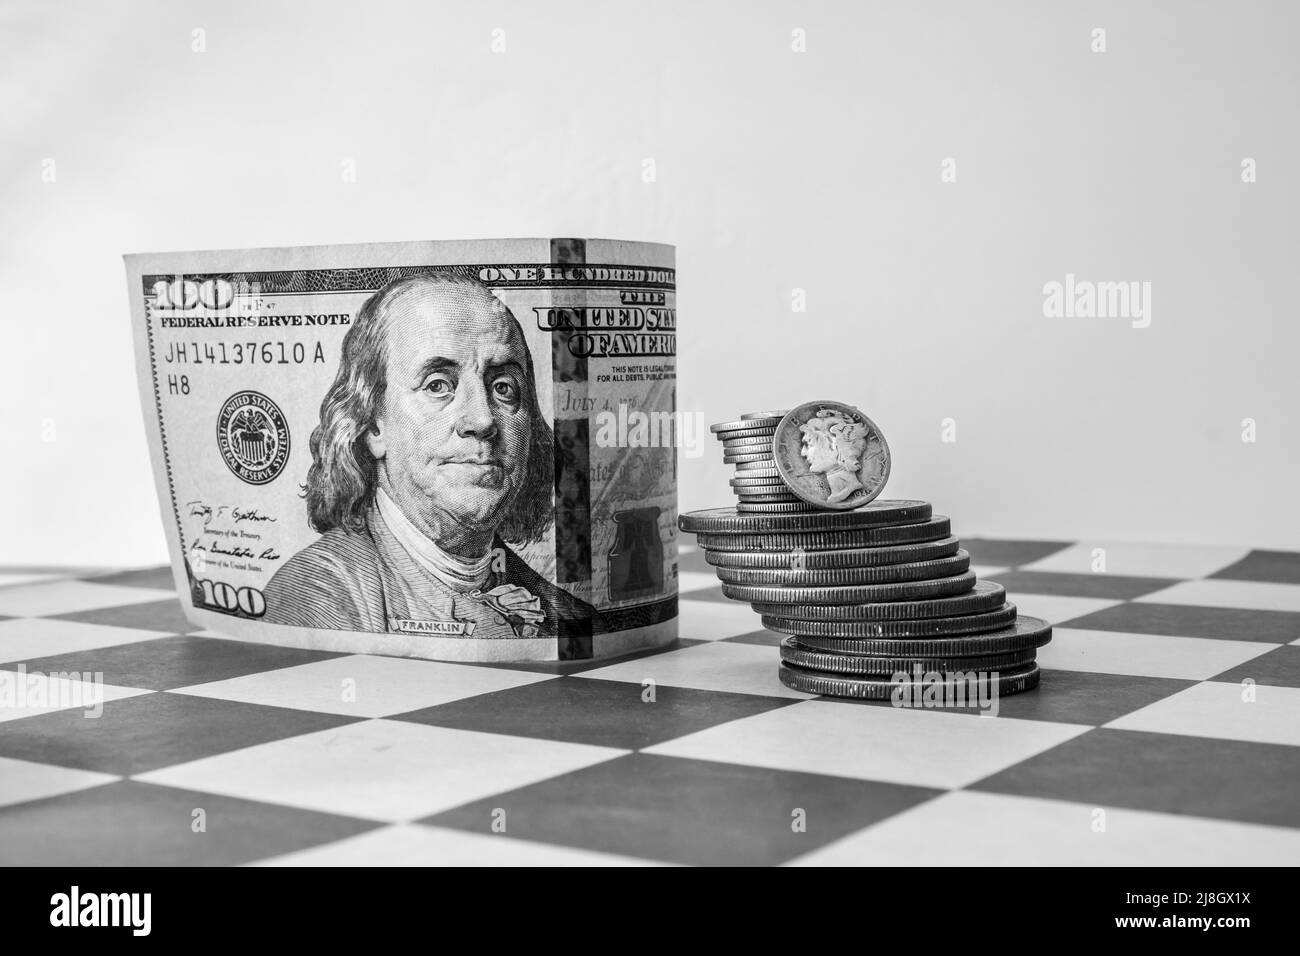 American Money, US Currency, 100 Dollar Bill, Stack of Silver Coins, Mercury Dime, on Chess Board Stock Photo